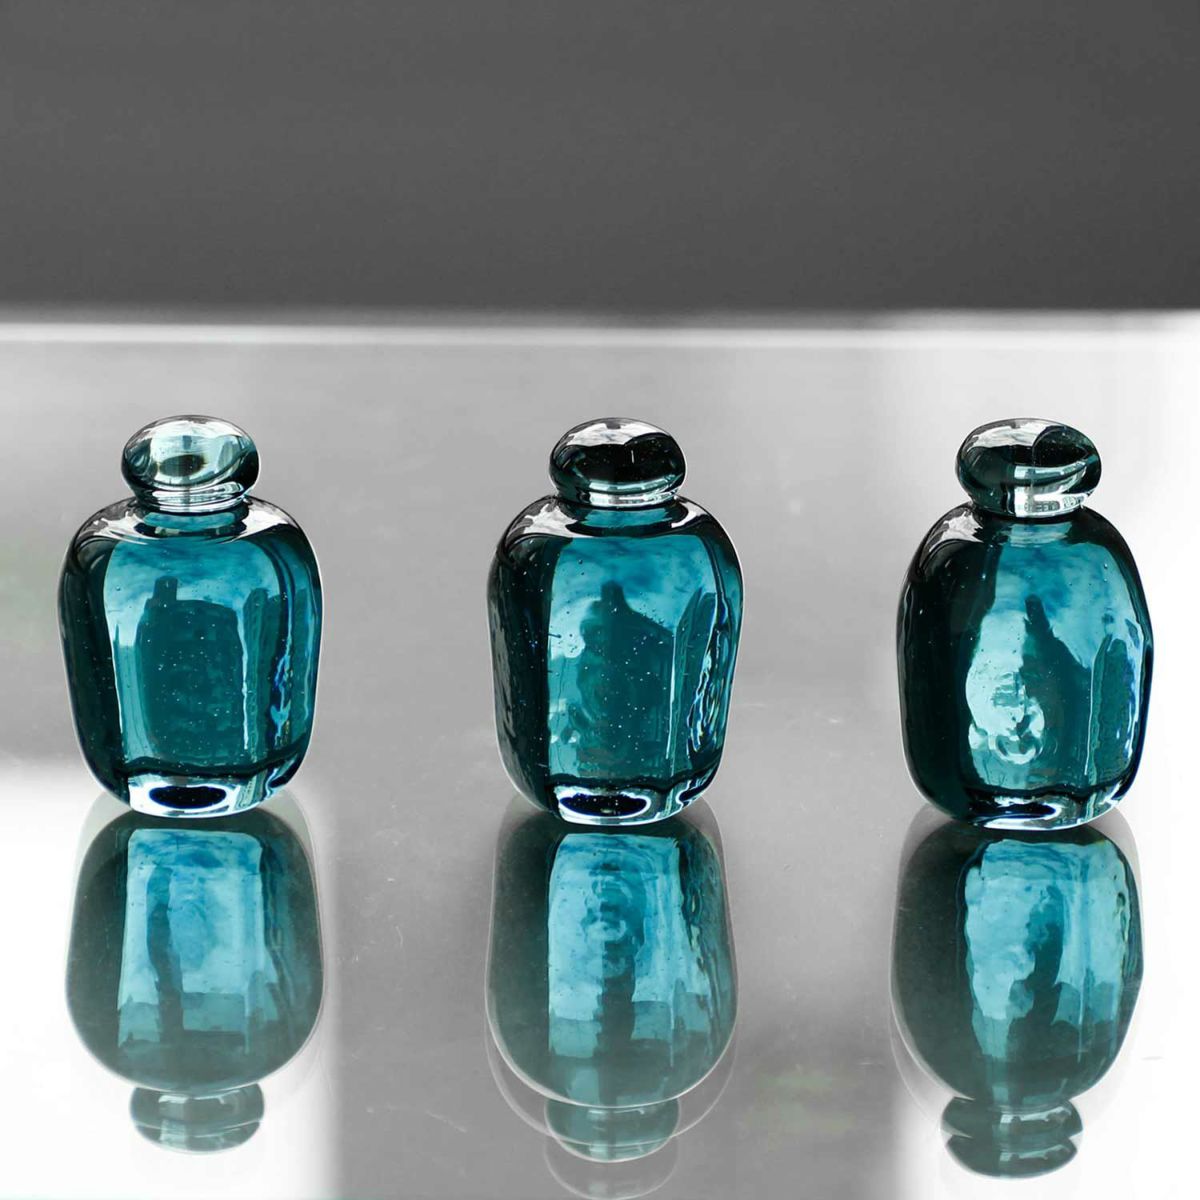 Hightide Attache Recycled Glass Paperweight